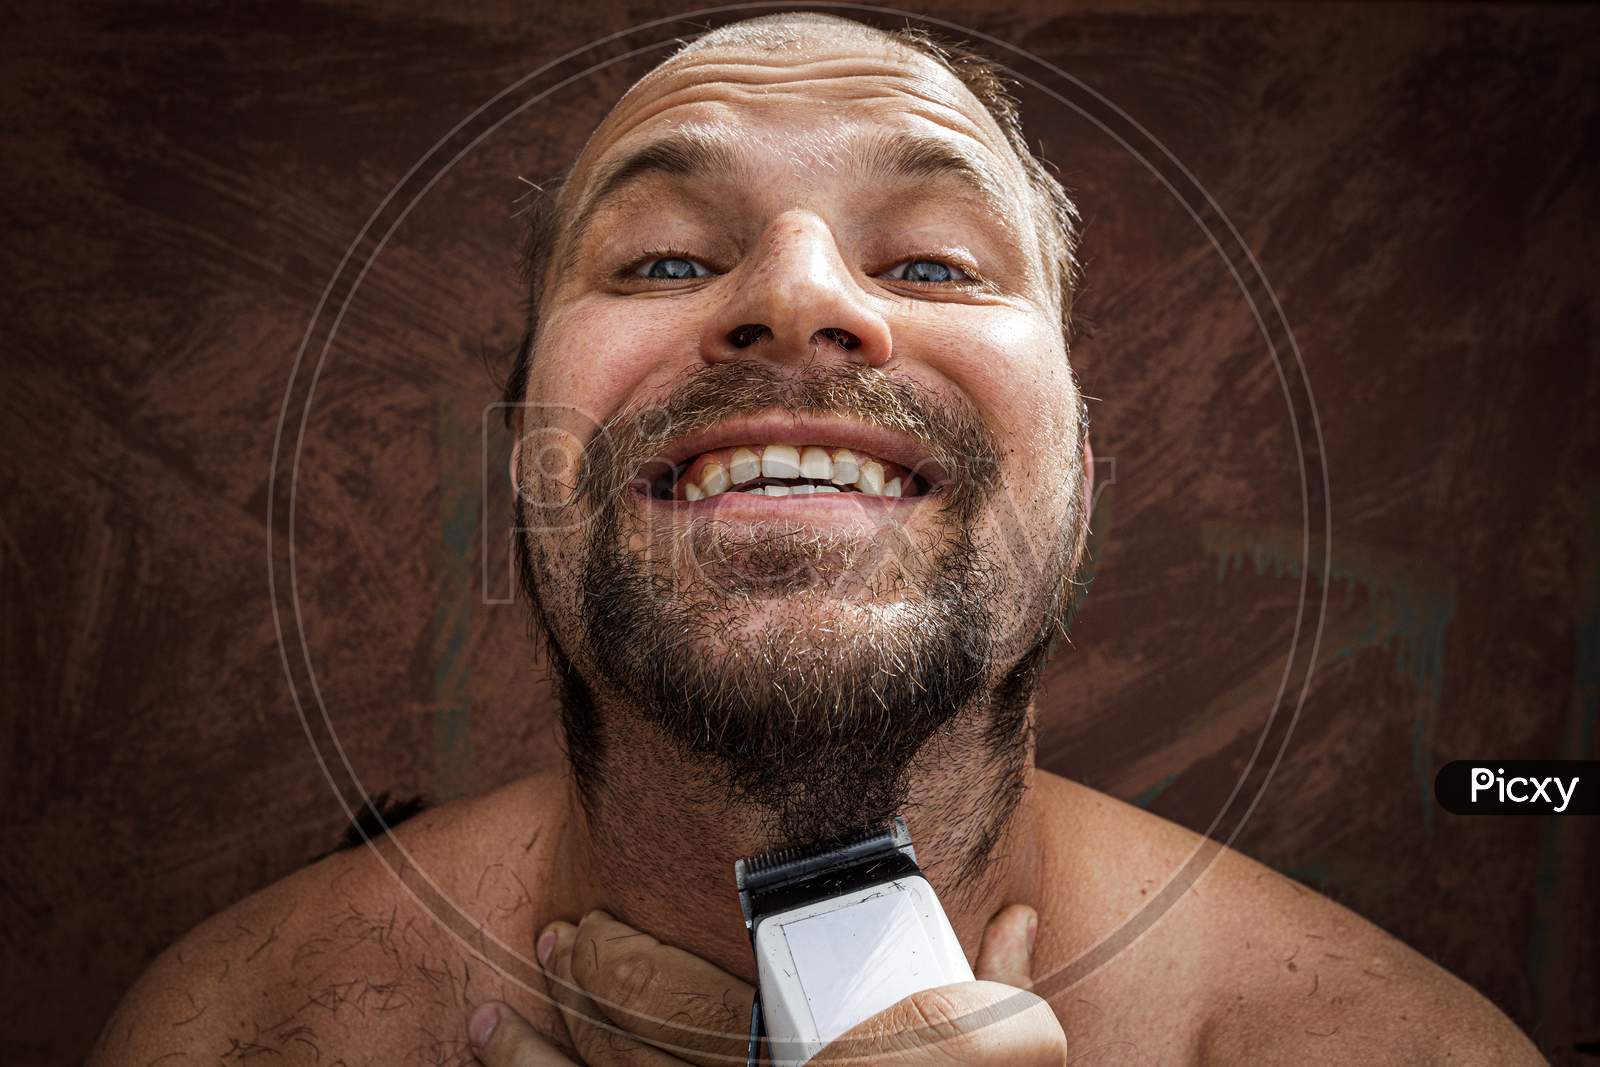 Close-Up Portrait Of Handsome Shirtless Man Shaving His Beard With An Electric Razor And Gritting His Teeth, Against Brutal Background. Concept Of Male Home Care Without Beauty Salons